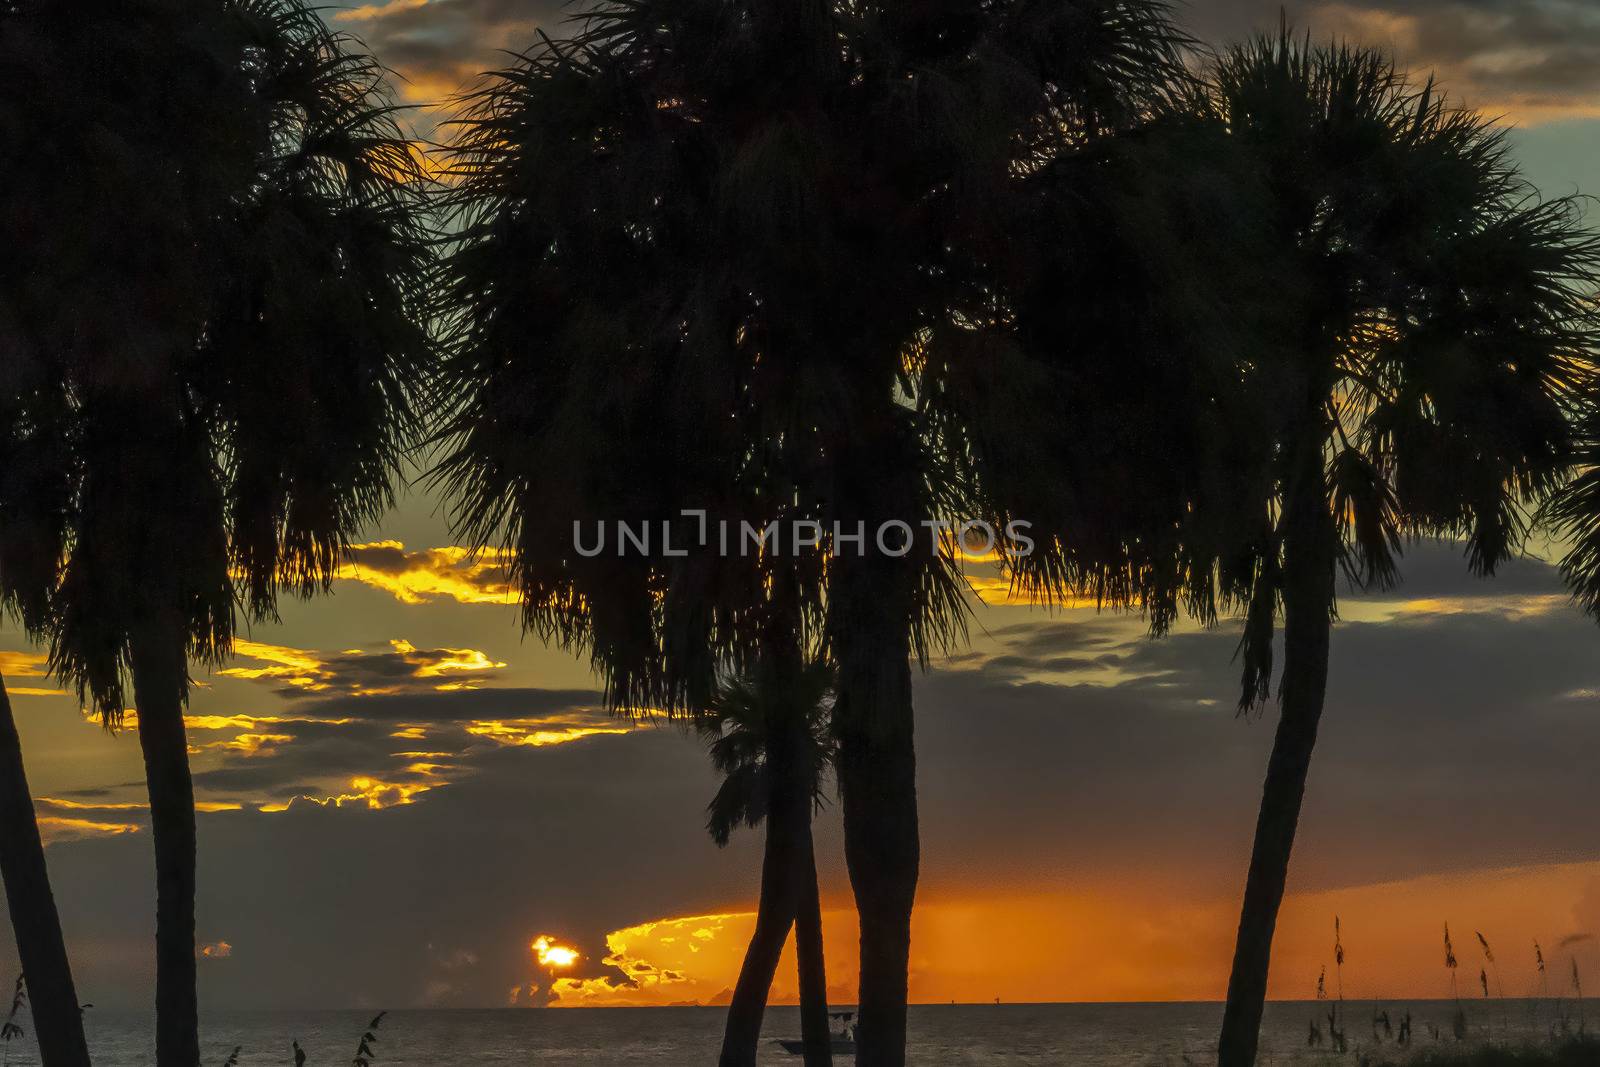 Scenic views of the Florida coast at sunset